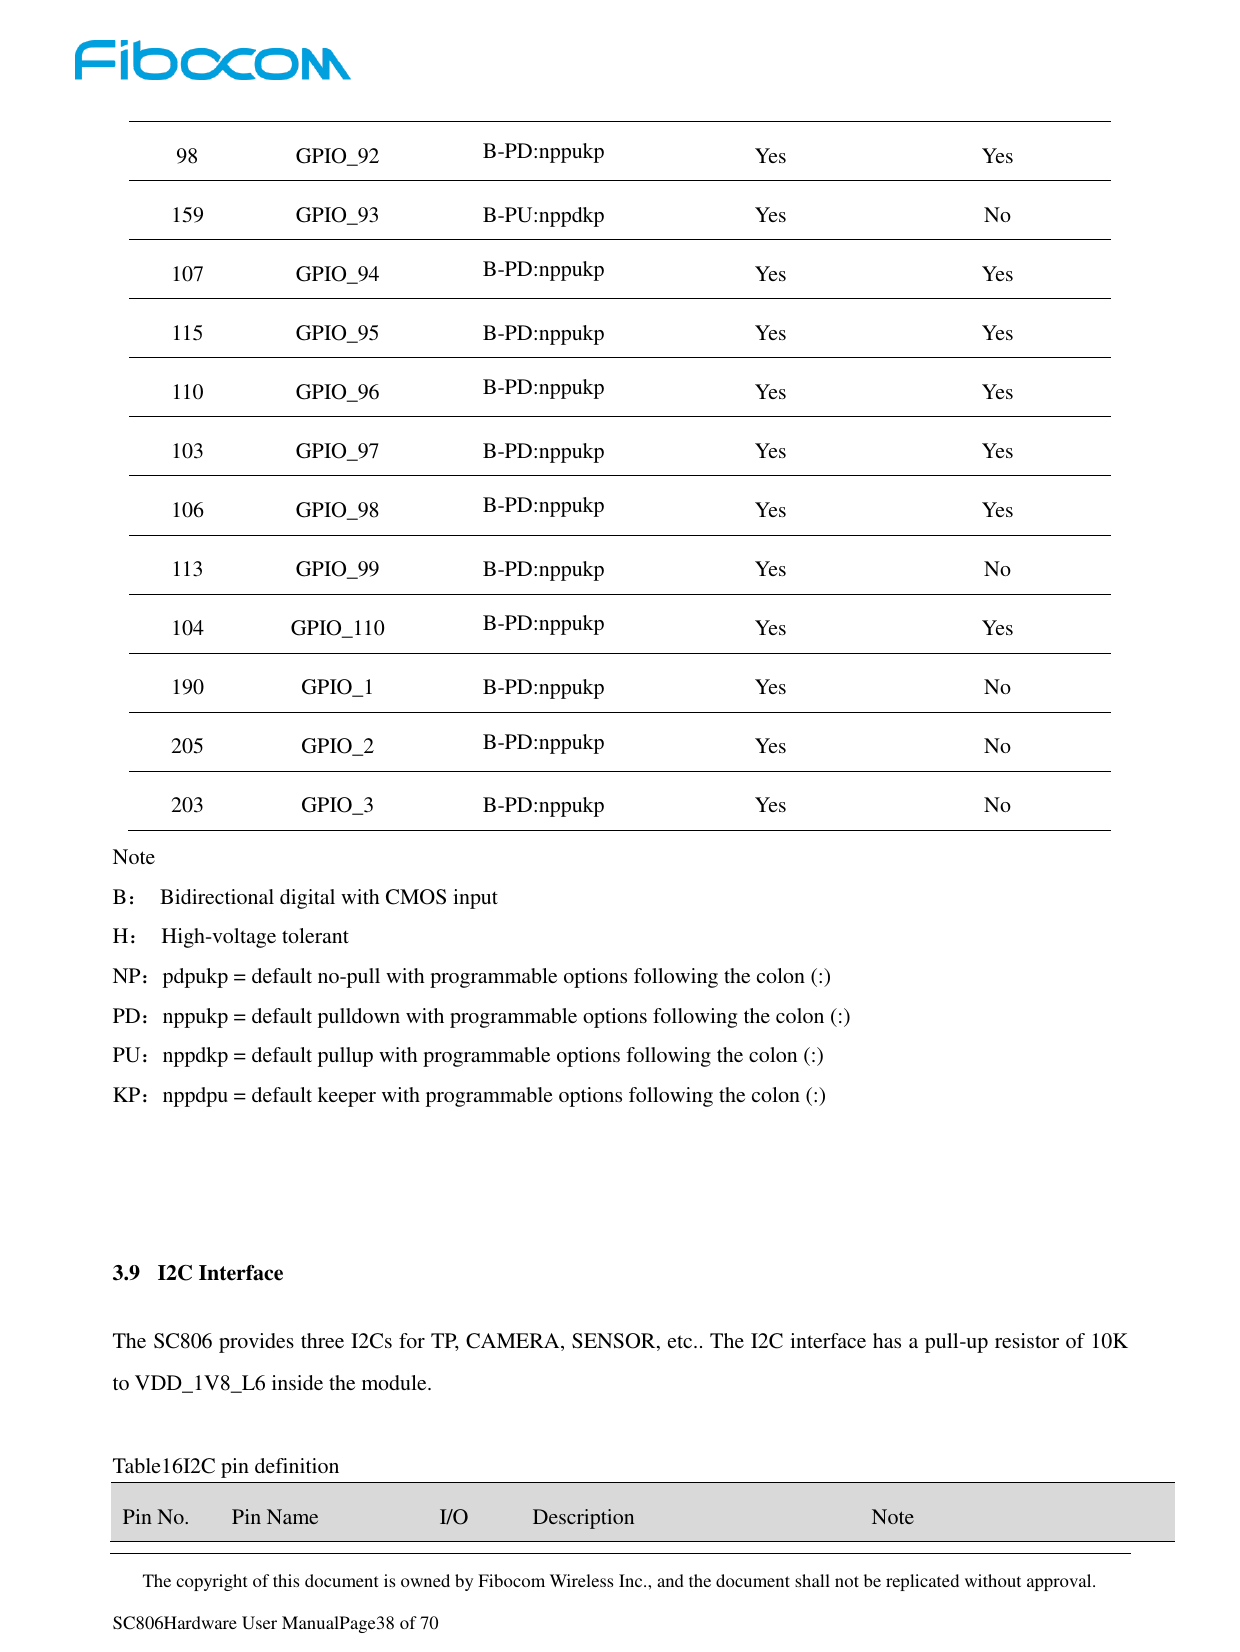     The copyright of this document is owned by Fibocom Wireless Inc., and the document shall not be replicated without approval.   SC806Hardware User ManualPage38 of 70 98 GPIO_92 B-PD:nppukp Yes Yes 159 GPIO_93 B-PU:nppdkp Yes No 107 GPIO_94 B-PD:nppukp Yes Yes 115 GPIO_95 B-PD:nppukp Yes Yes 110 GPIO_96 B-PD:nppukp Yes Yes 103 GPIO_97 B-PD:nppukp Yes Yes 106 GPIO_98 B-PD:nppukp Yes Yes 113 GPIO_99 B-PD:nppukp Yes No 104 GPIO_110 B-PD:nppukp Yes Yes 190 GPIO_1 B-PD:nppukp Yes No 205 GPIO_2 B-PD:nppukp Yes No 203 GPIO_3 B-PD:nppukp Yes No Note B：  Bidirectional digital with CMOS input H：  High-voltage tolerant NP：pdpukp = default no-pull with programmable options following the colon (:) PD：nppukp = default pulldown with programmable options following the colon (:) PU：nppdkp = default pullup with programmable options following the colon (:) KP：nppdpu = default keeper with programmable options following the colon (:)    3.9 I2C Interface The SC806 provides three I2Cs for TP, CAMERA, SENSOR, etc.. The I2C interface has a pull-up resistor of 10K to VDD_1V8_L6 inside the module.  Table16I2C pin definition Pin No. Pin Name I/O Description Note 